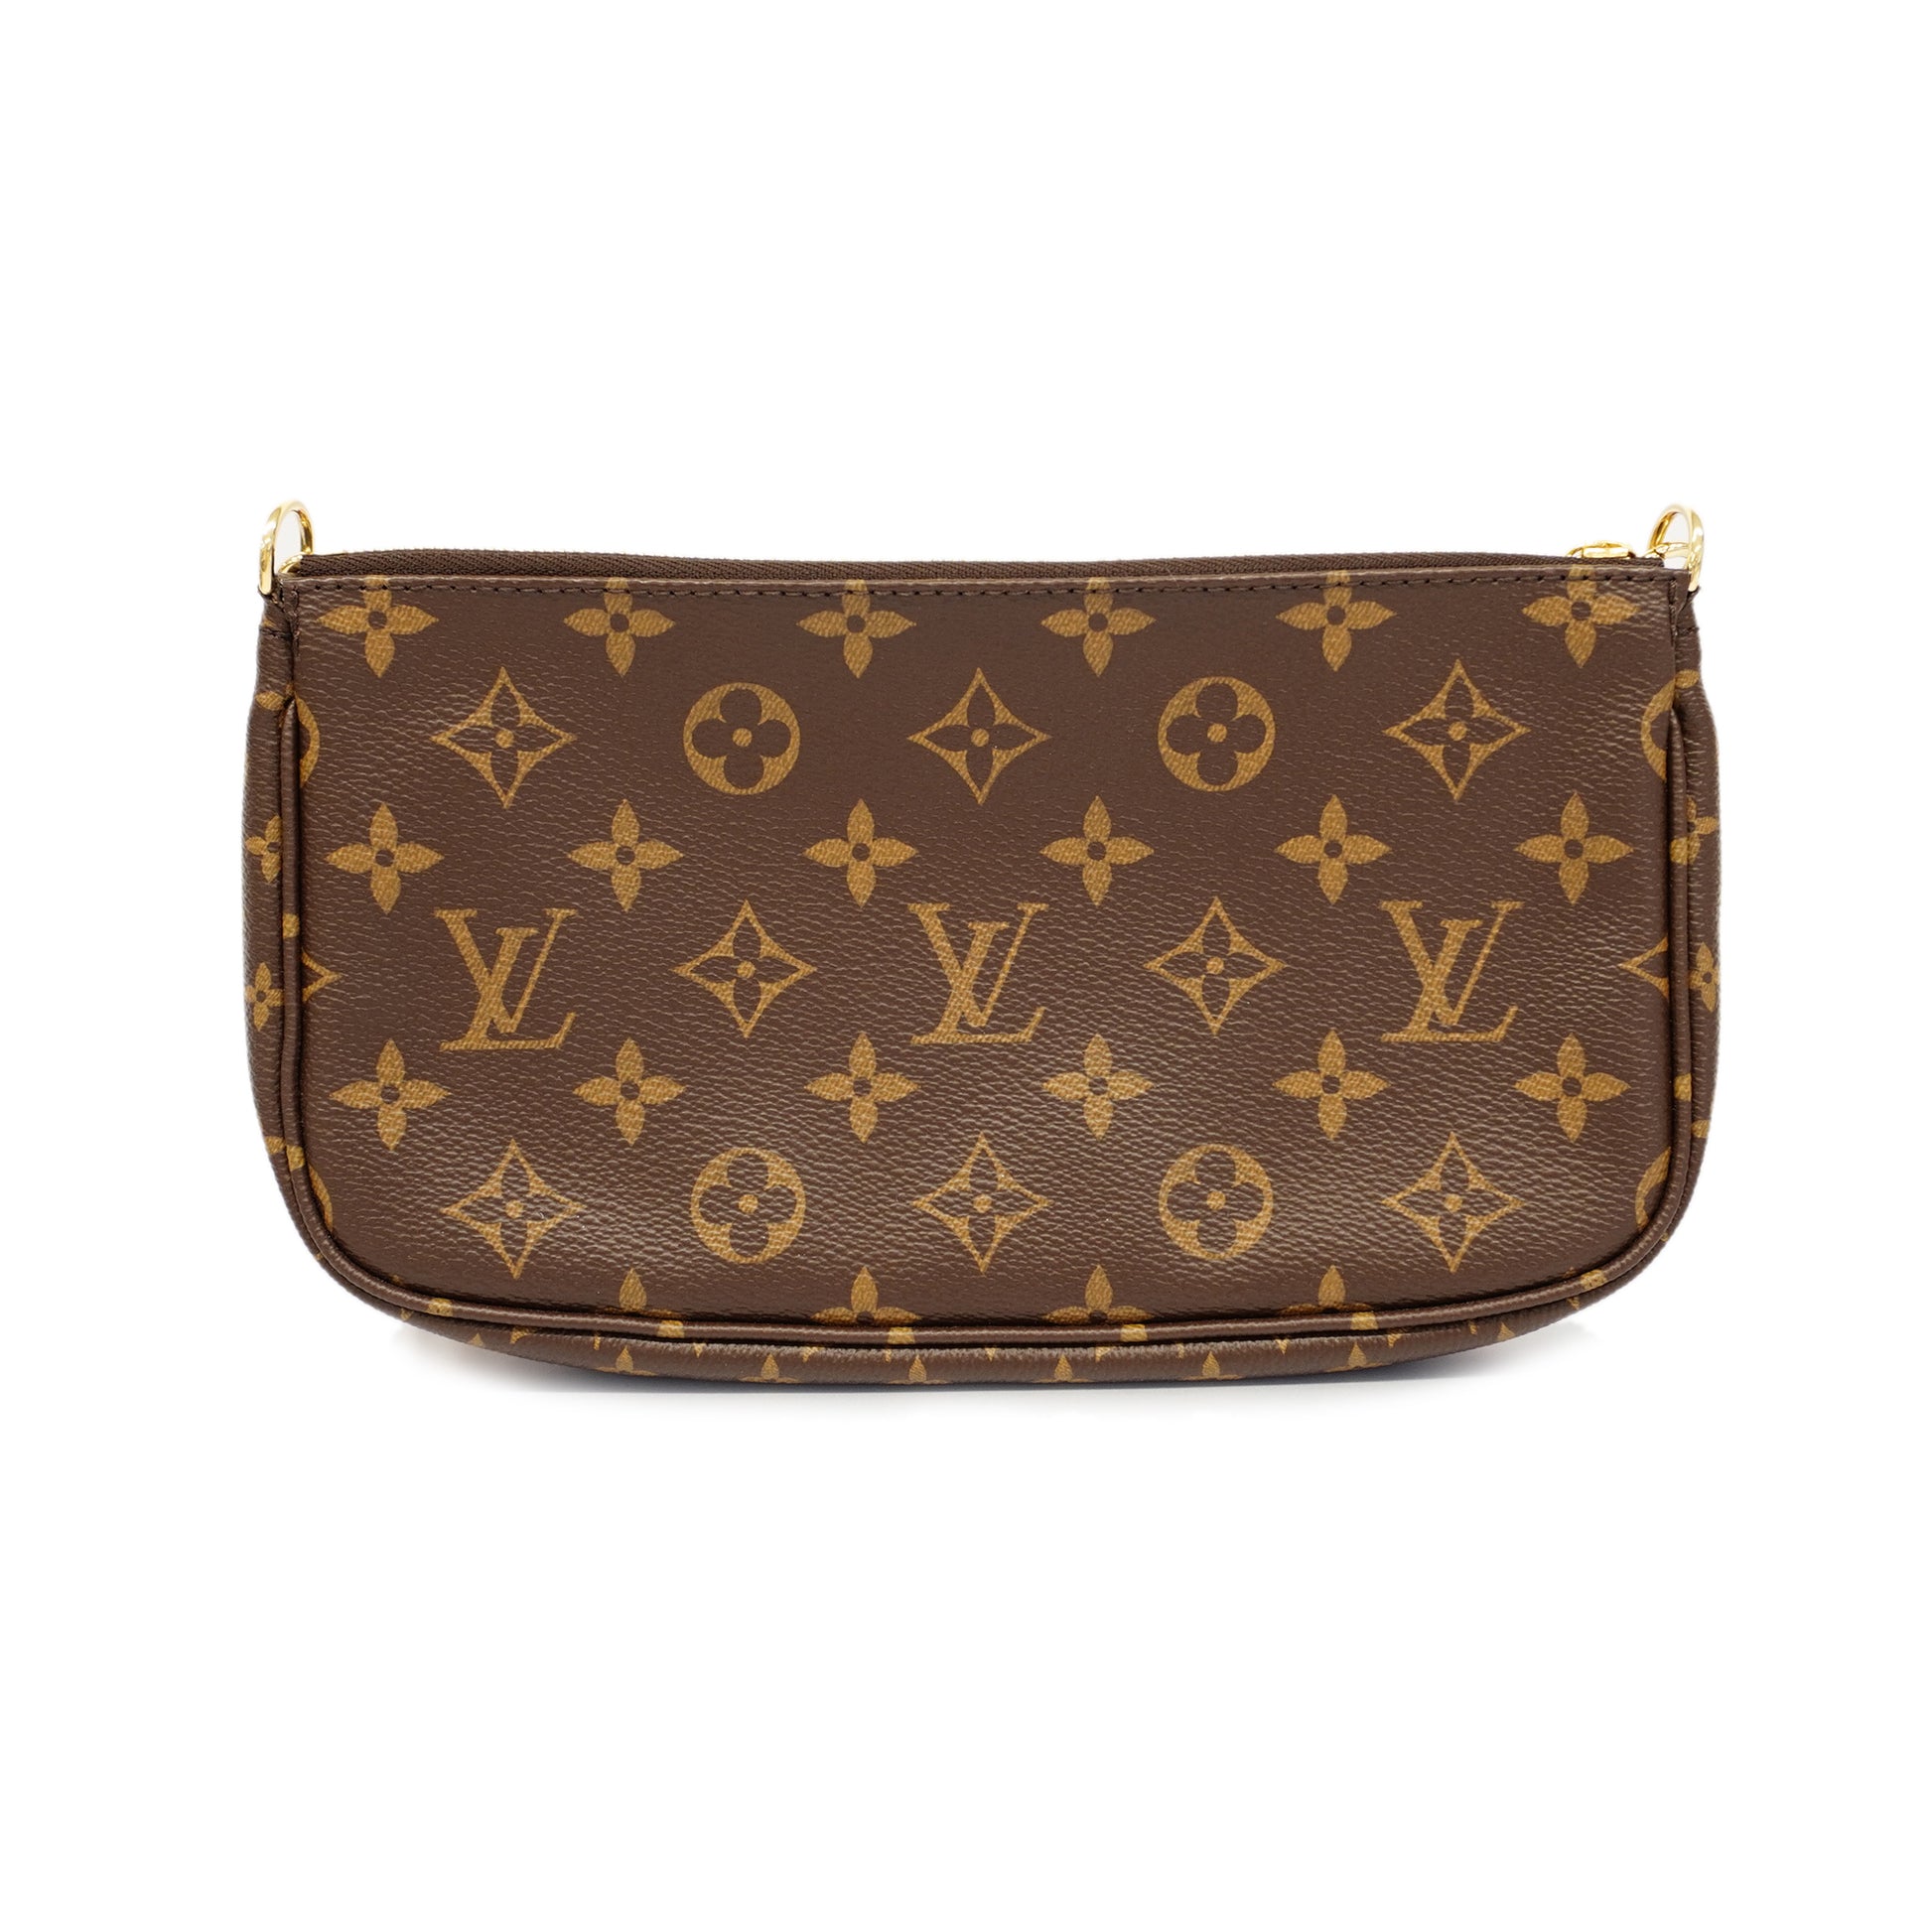 Vintage and Musthaves. Louis Vuitton Monogram M44840 Multi